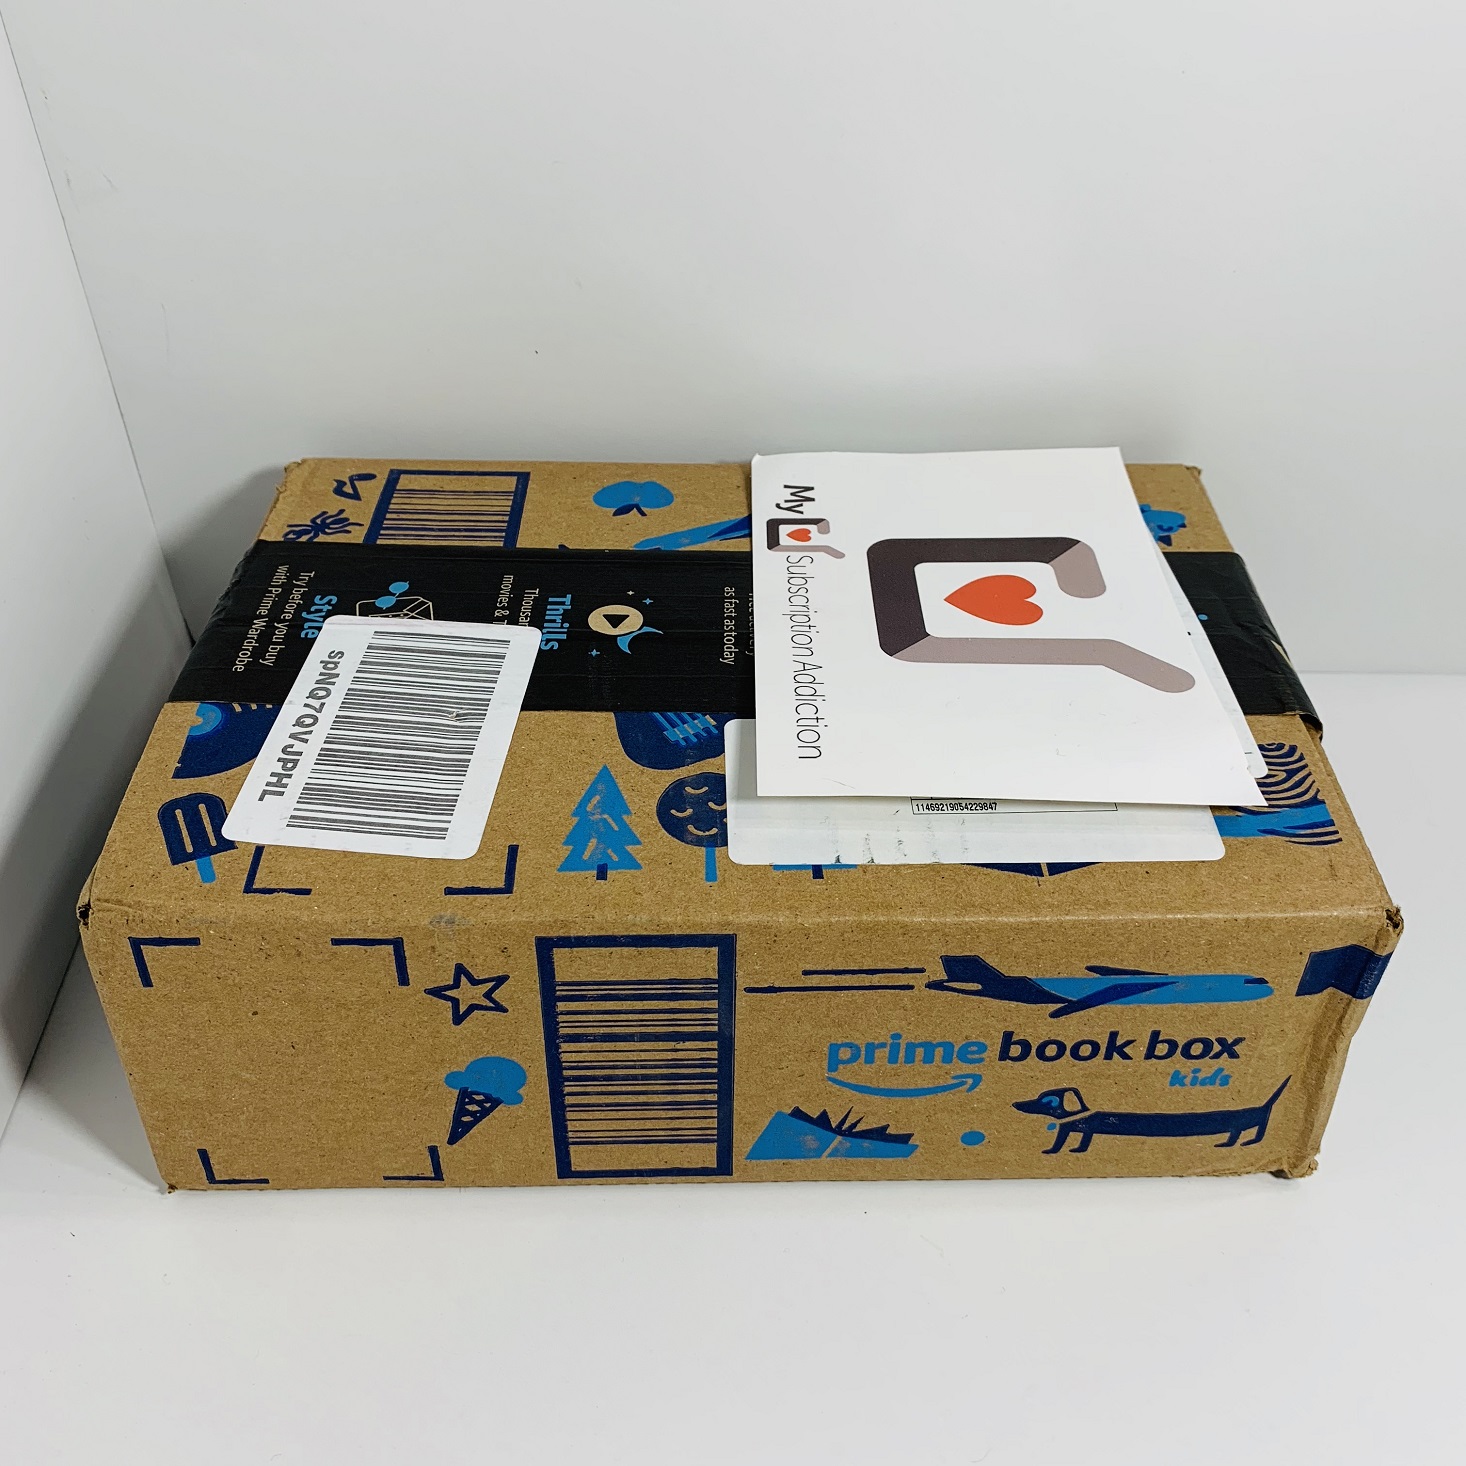 Amazon Prime Book Box, Ages 6-8 Review – September 2019